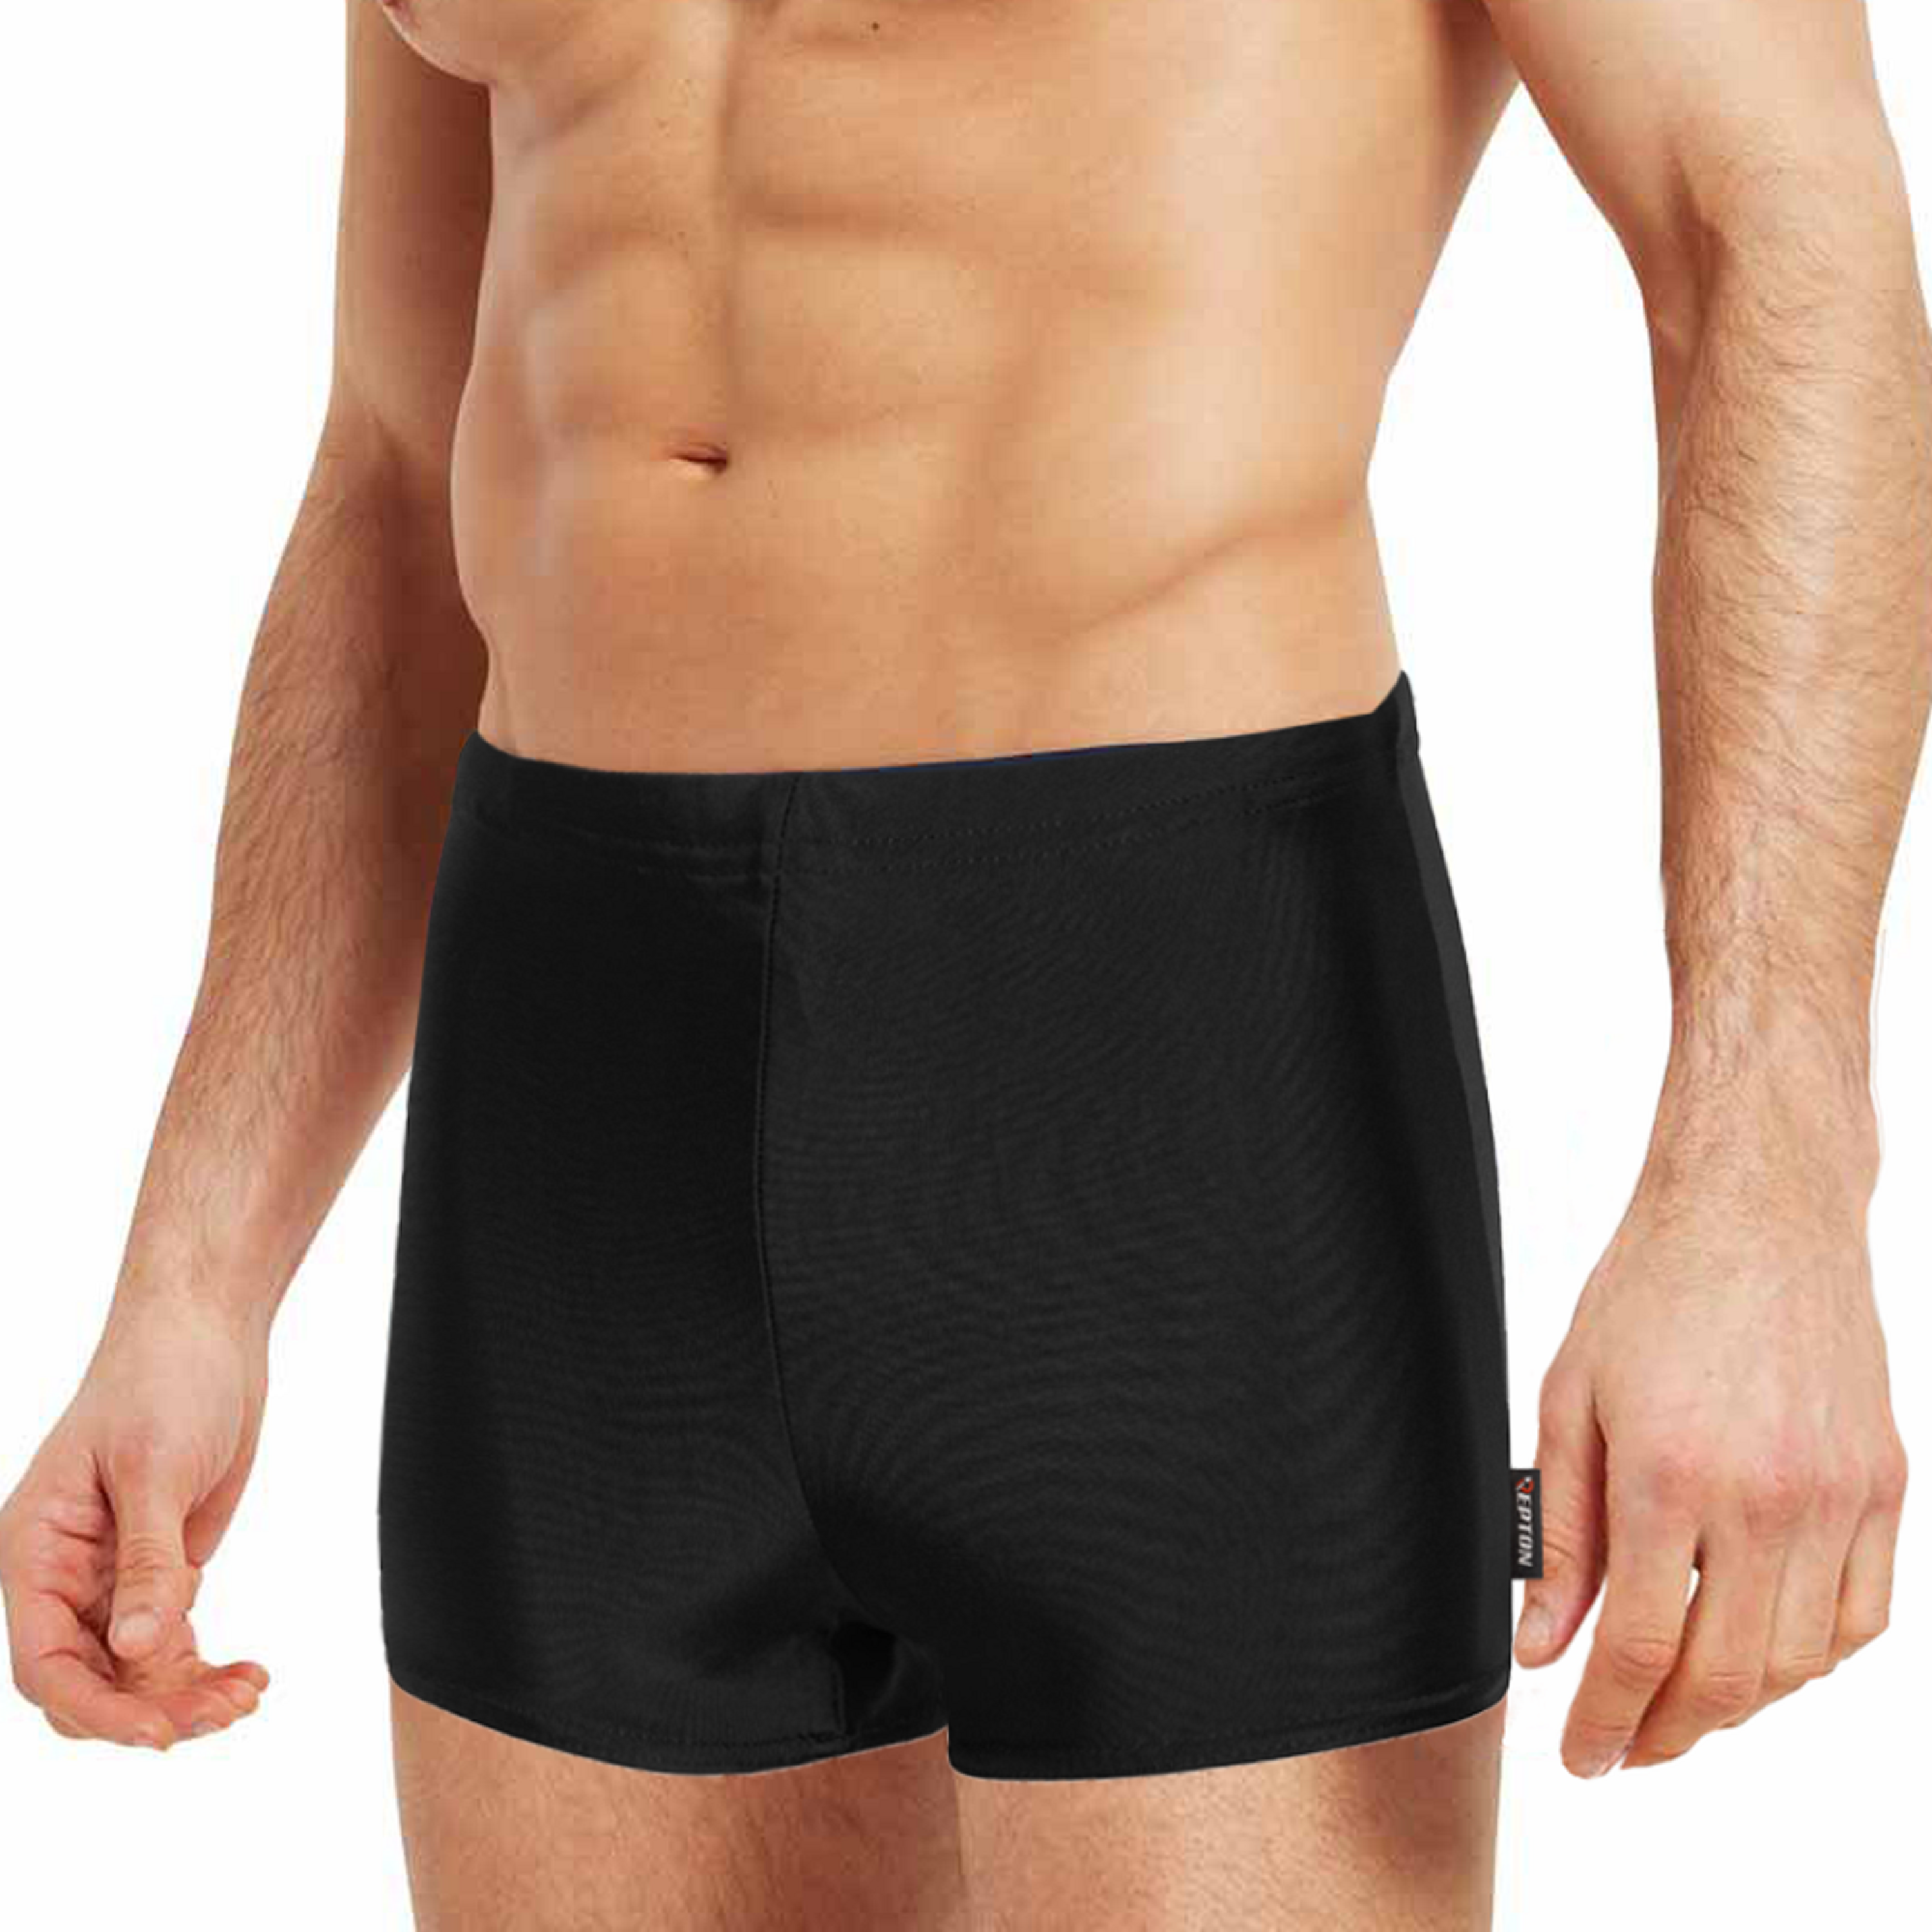 Swim Shorts Kids Swimming Boxer Trunks Swimwear with Drawstrings Repton Fitness and Boxing Gears